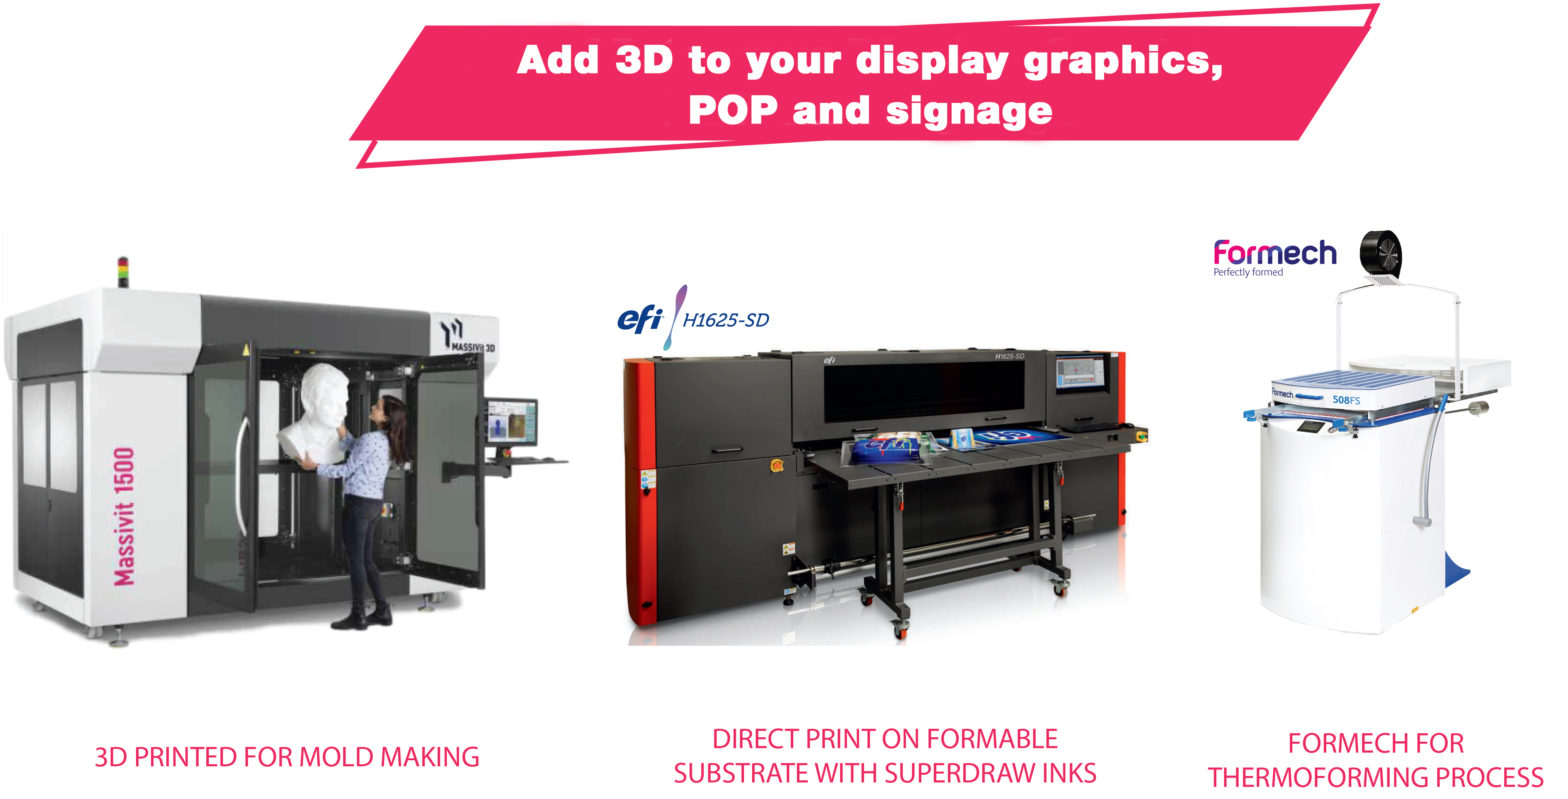 Give Life to Your POP Displays with Thermoforming Applications